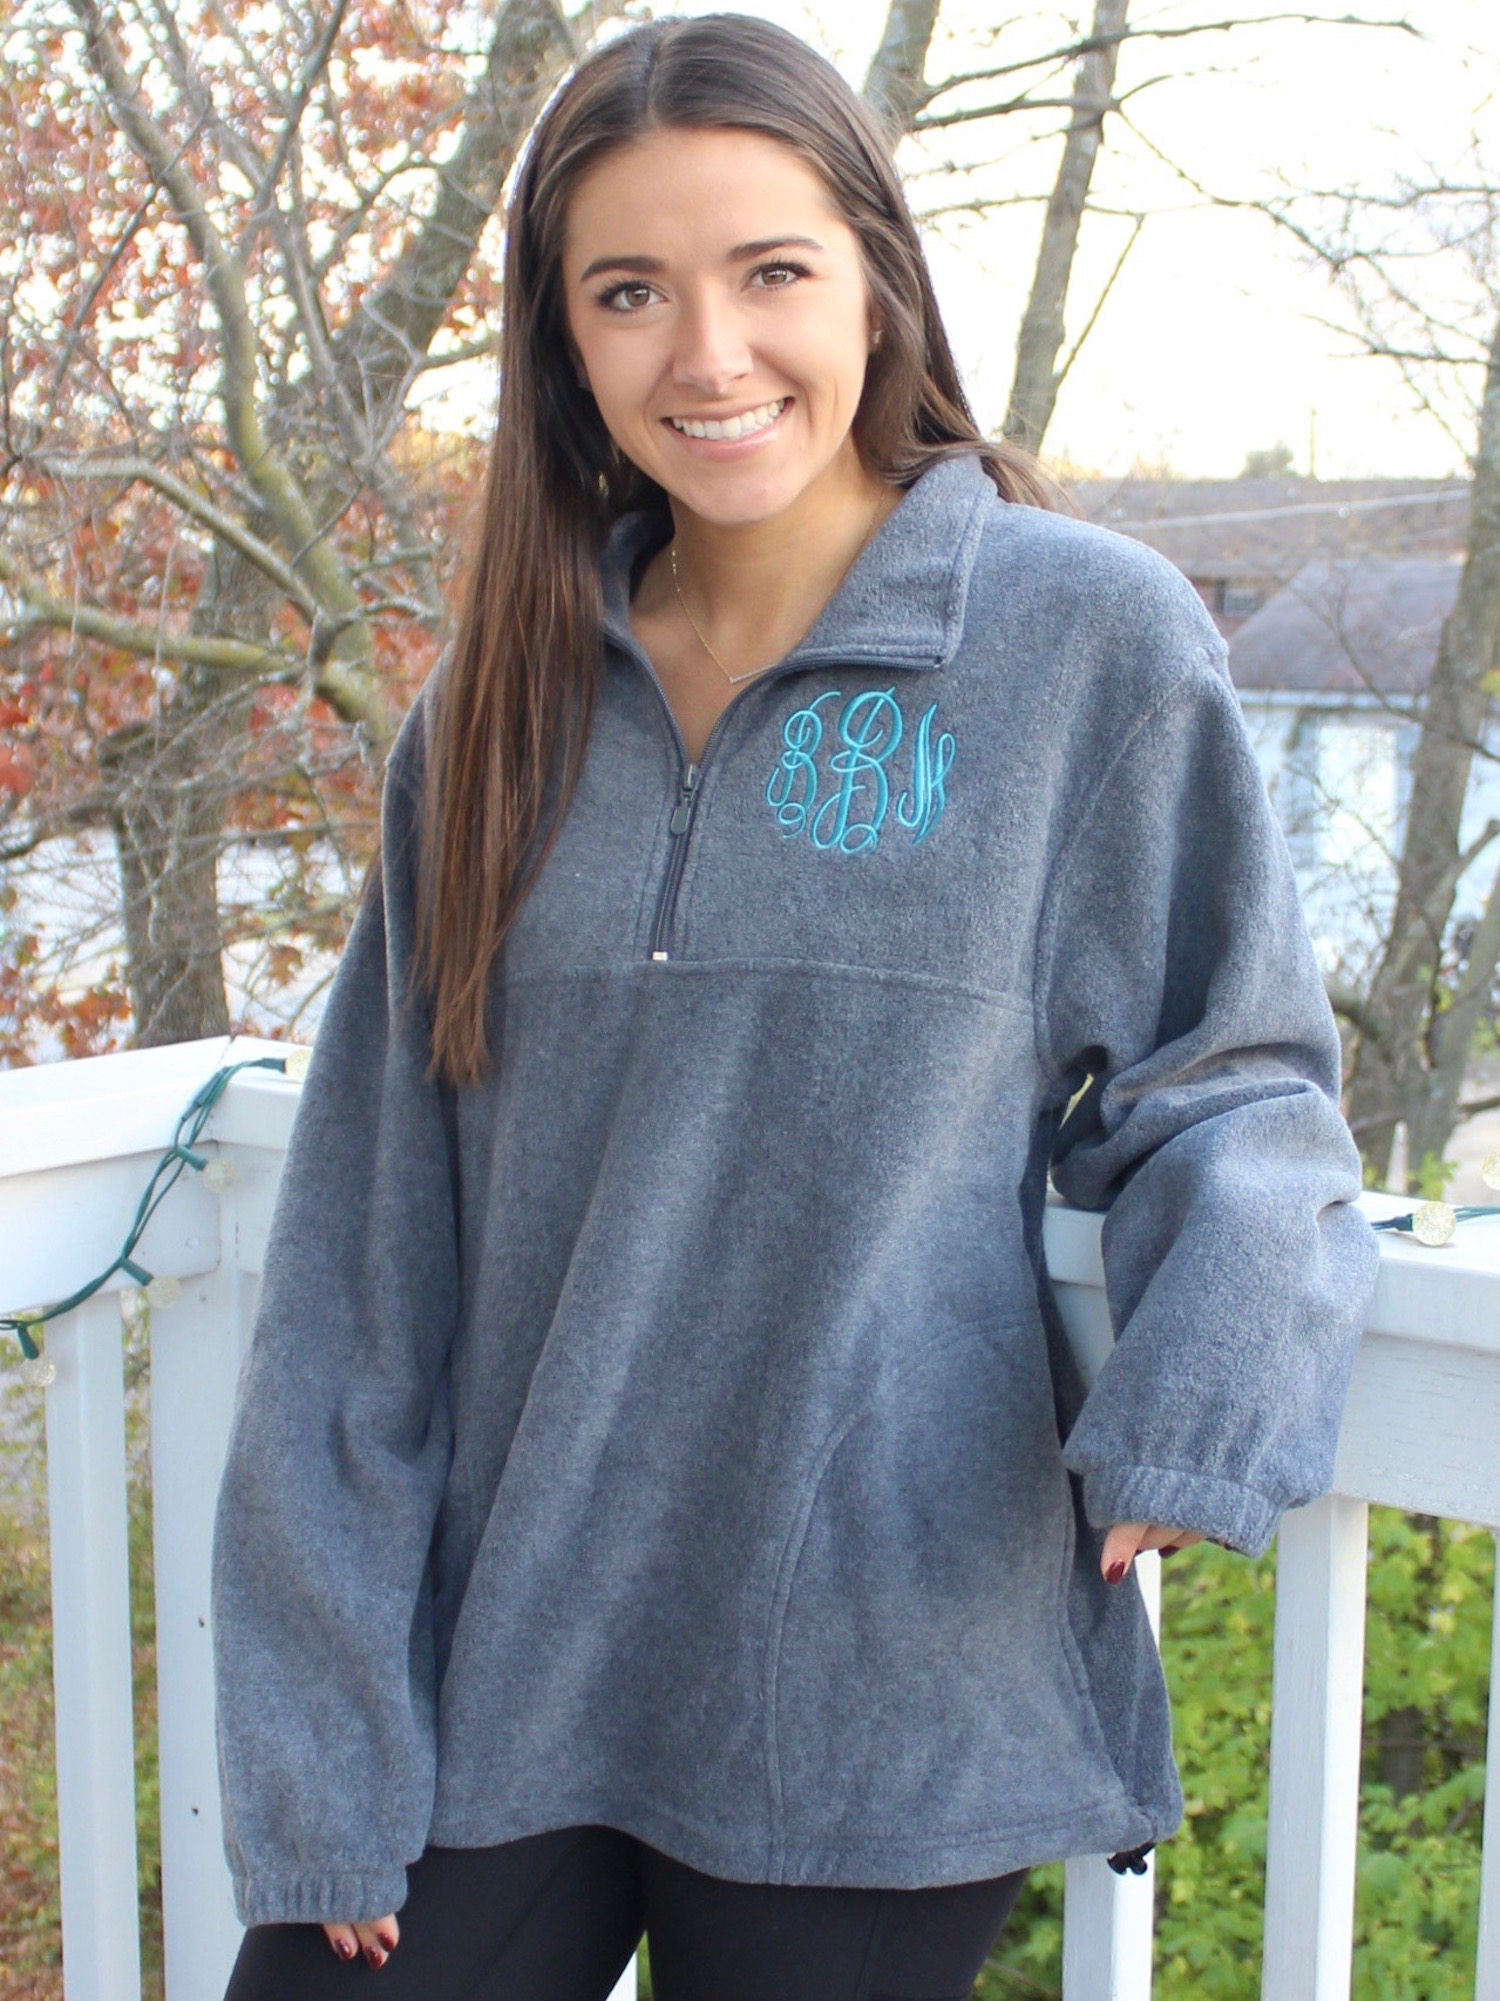 Happy Thoughts Gifts Monogrammed Fleece Pullover XLarge